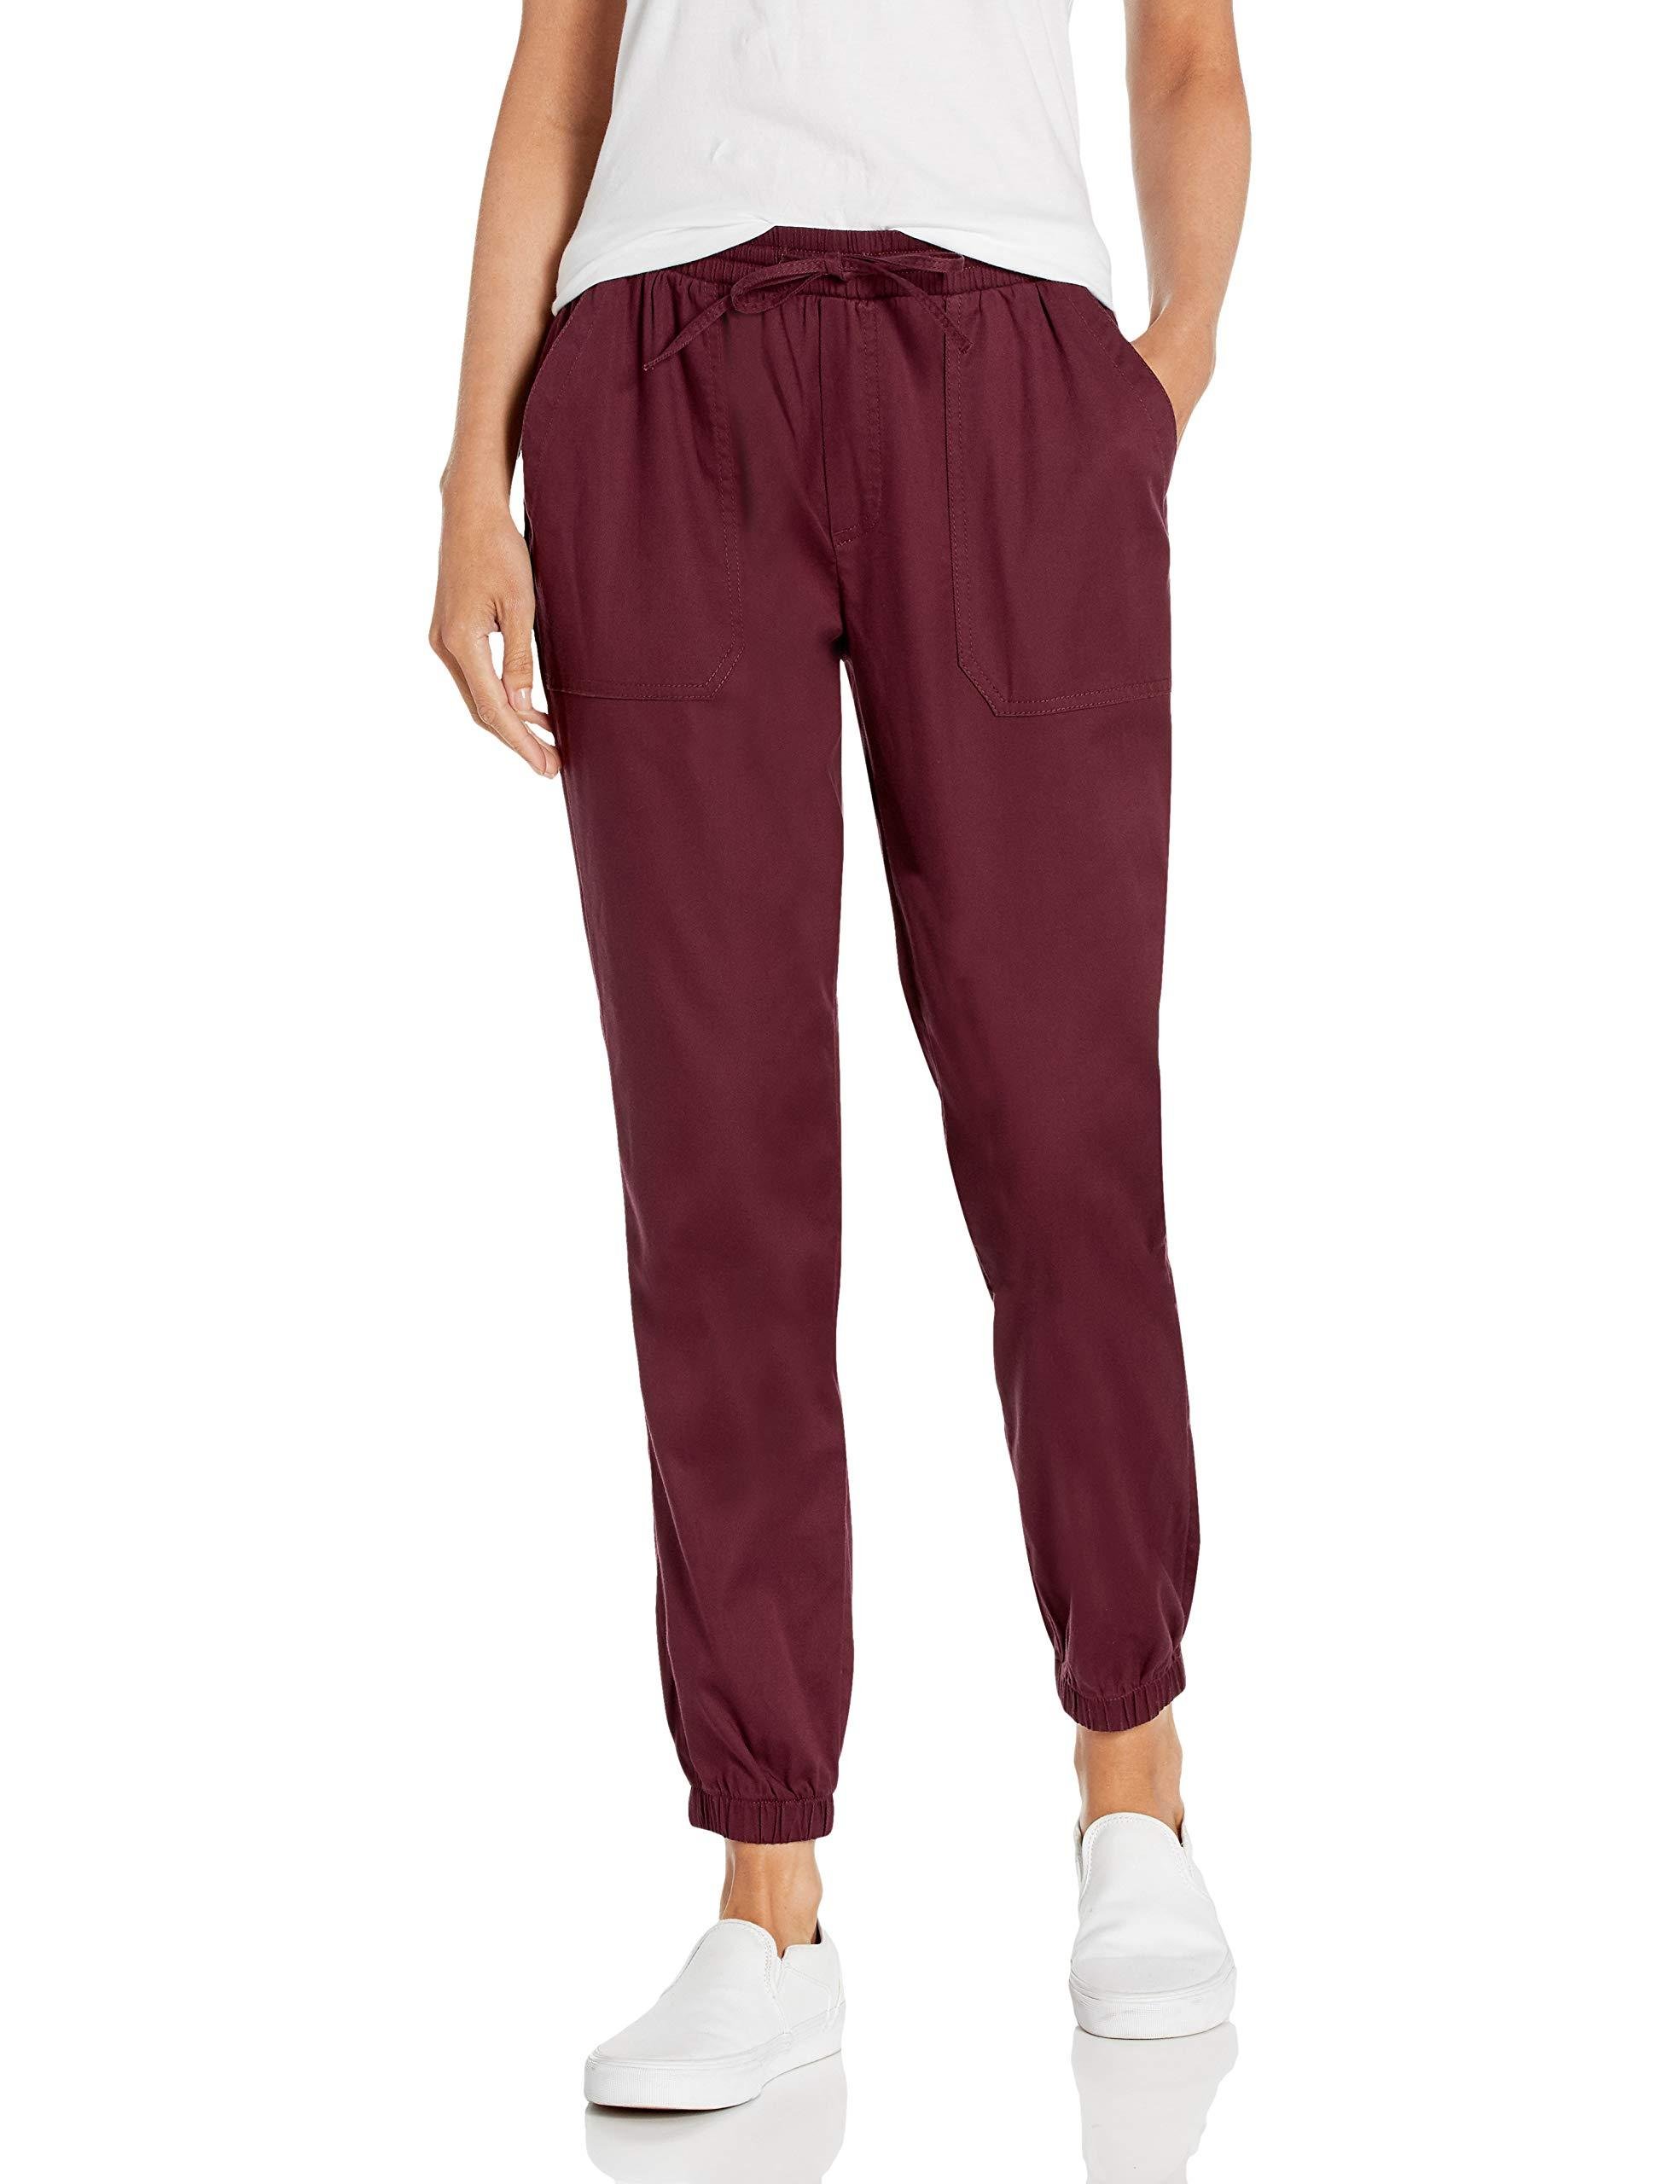 Daily Ritual Stretch Drawstring Jogger Pant in Red - Lyst